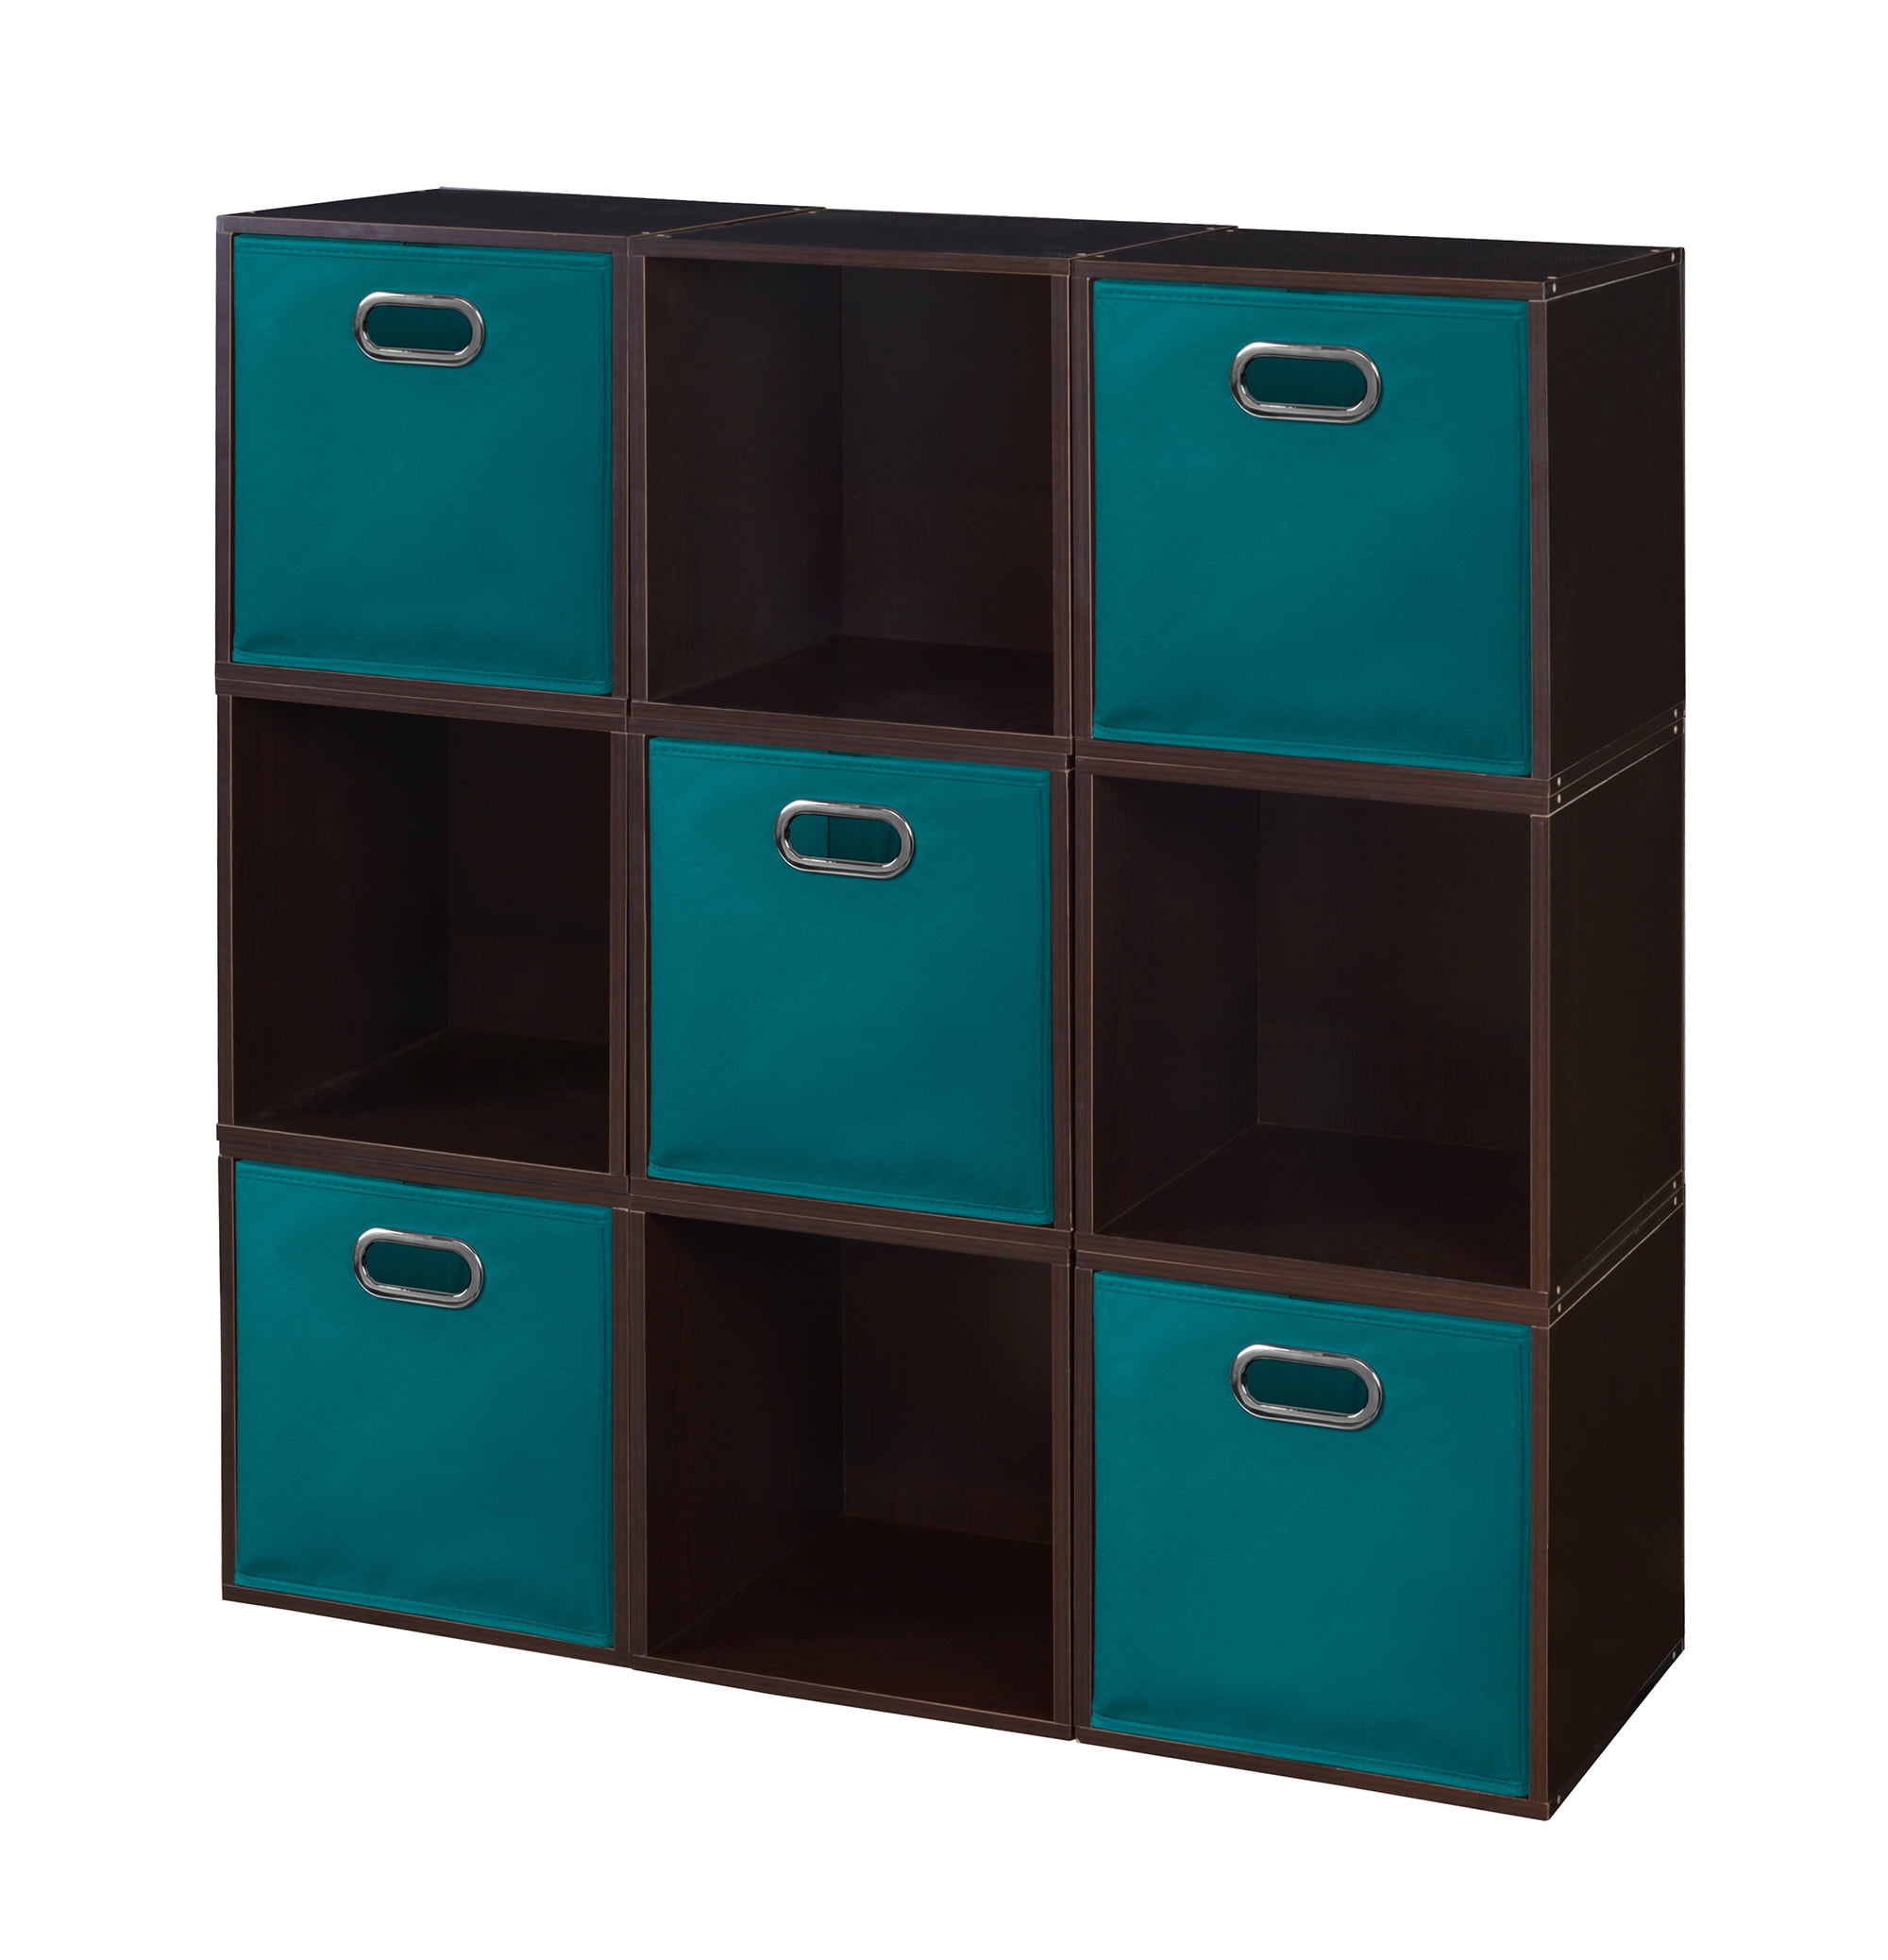 Niche Cubo Storage Set - 9 Cubes and 5 Canvas Bins- Truffle/Teal ...